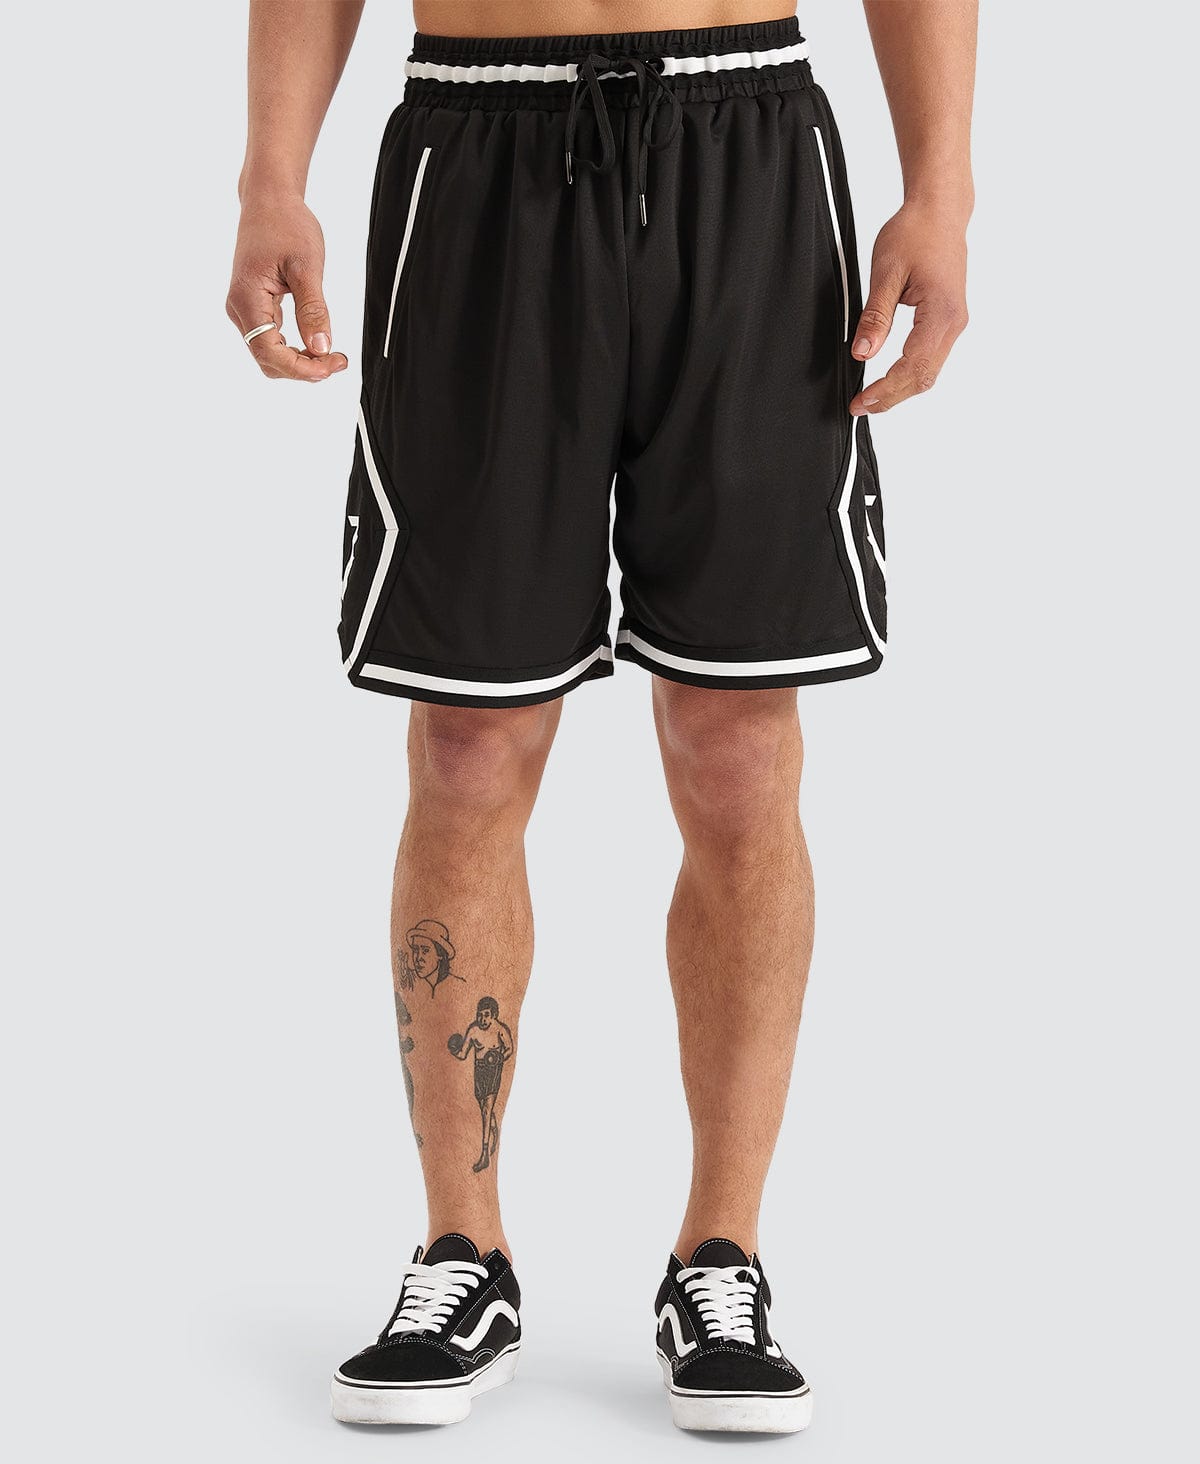 Fadeaway Basketball Shorts Red – Neverland Store